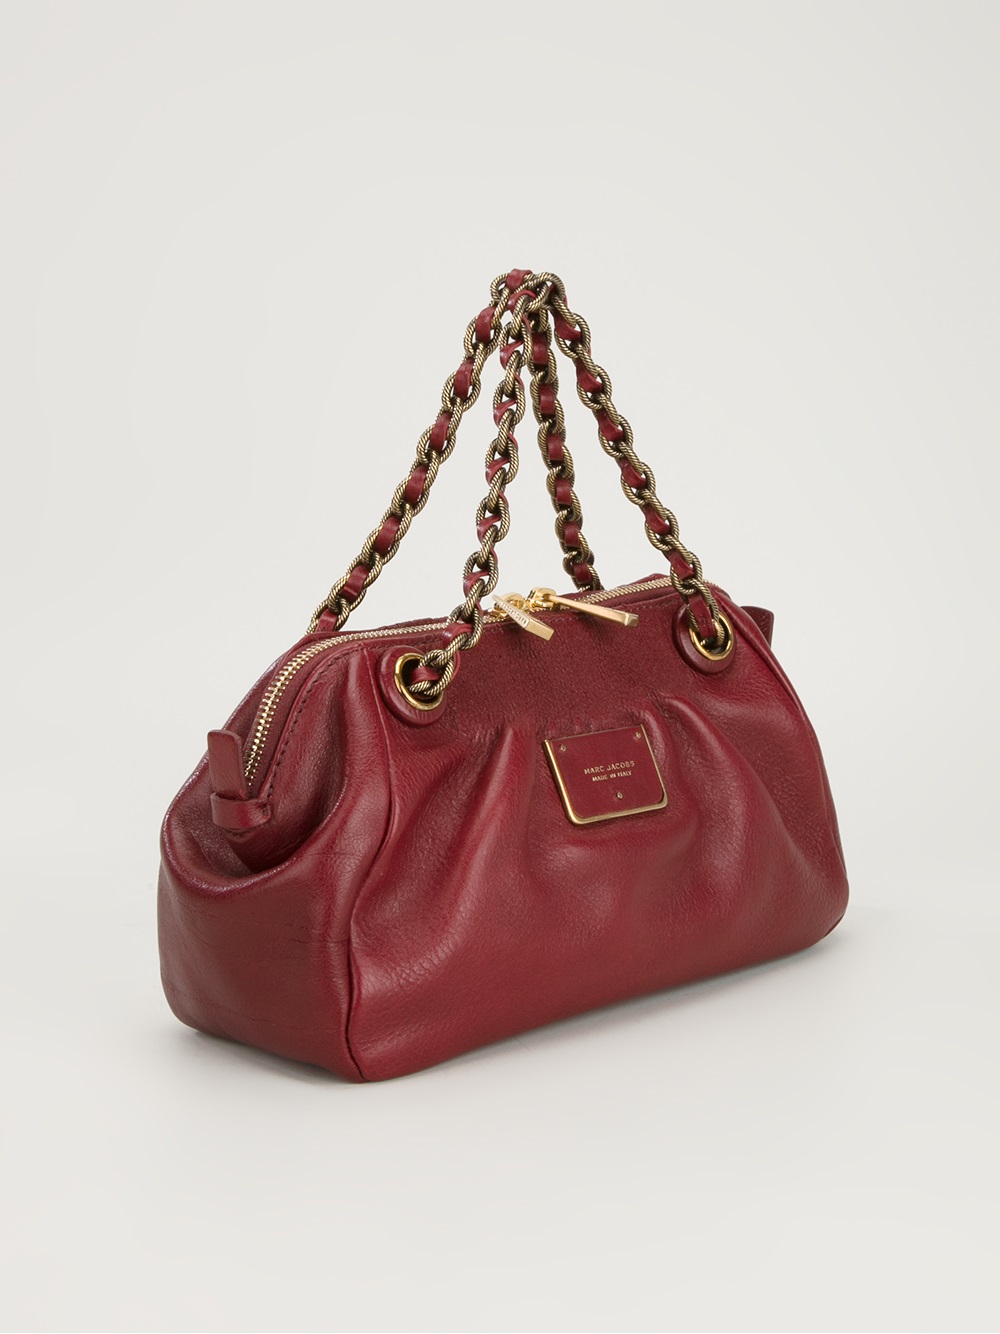 Marc Jacobs Chain Strap Shoulder Bag in Red - Lyst